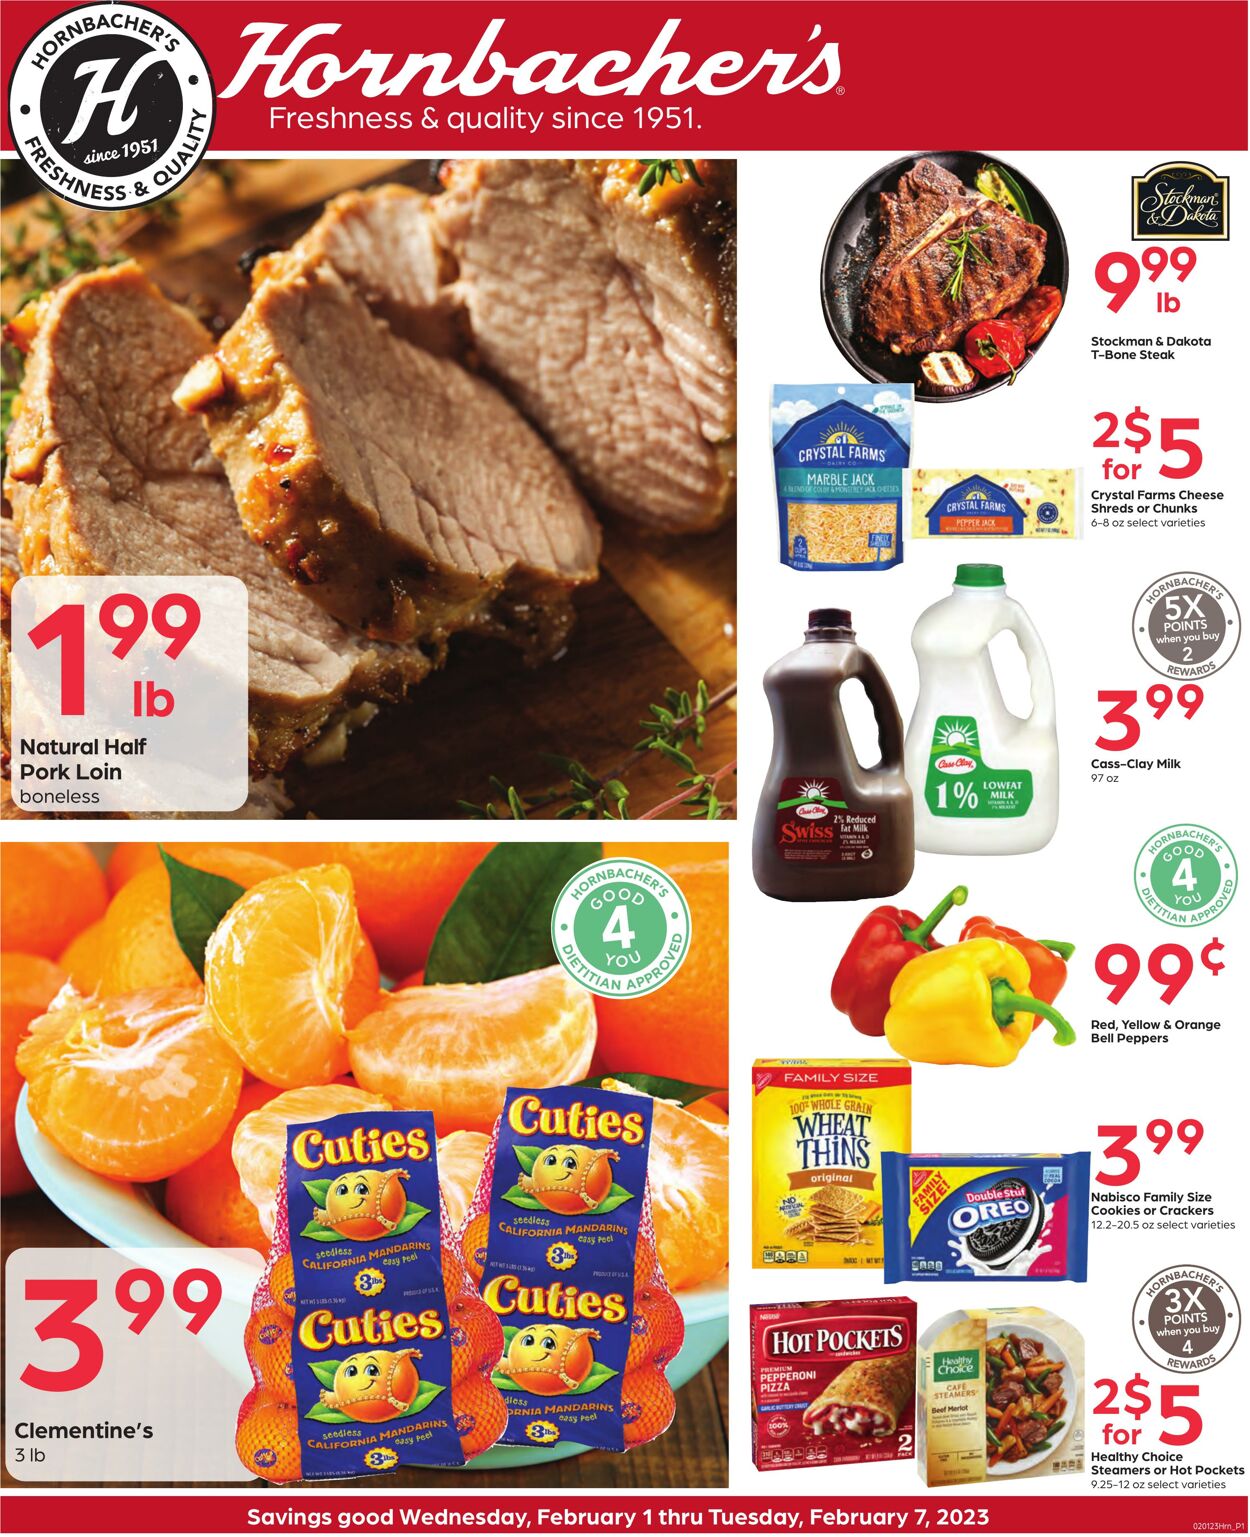 Weekly ad Hornbacher's 02/01/2023 - 02/07/2023